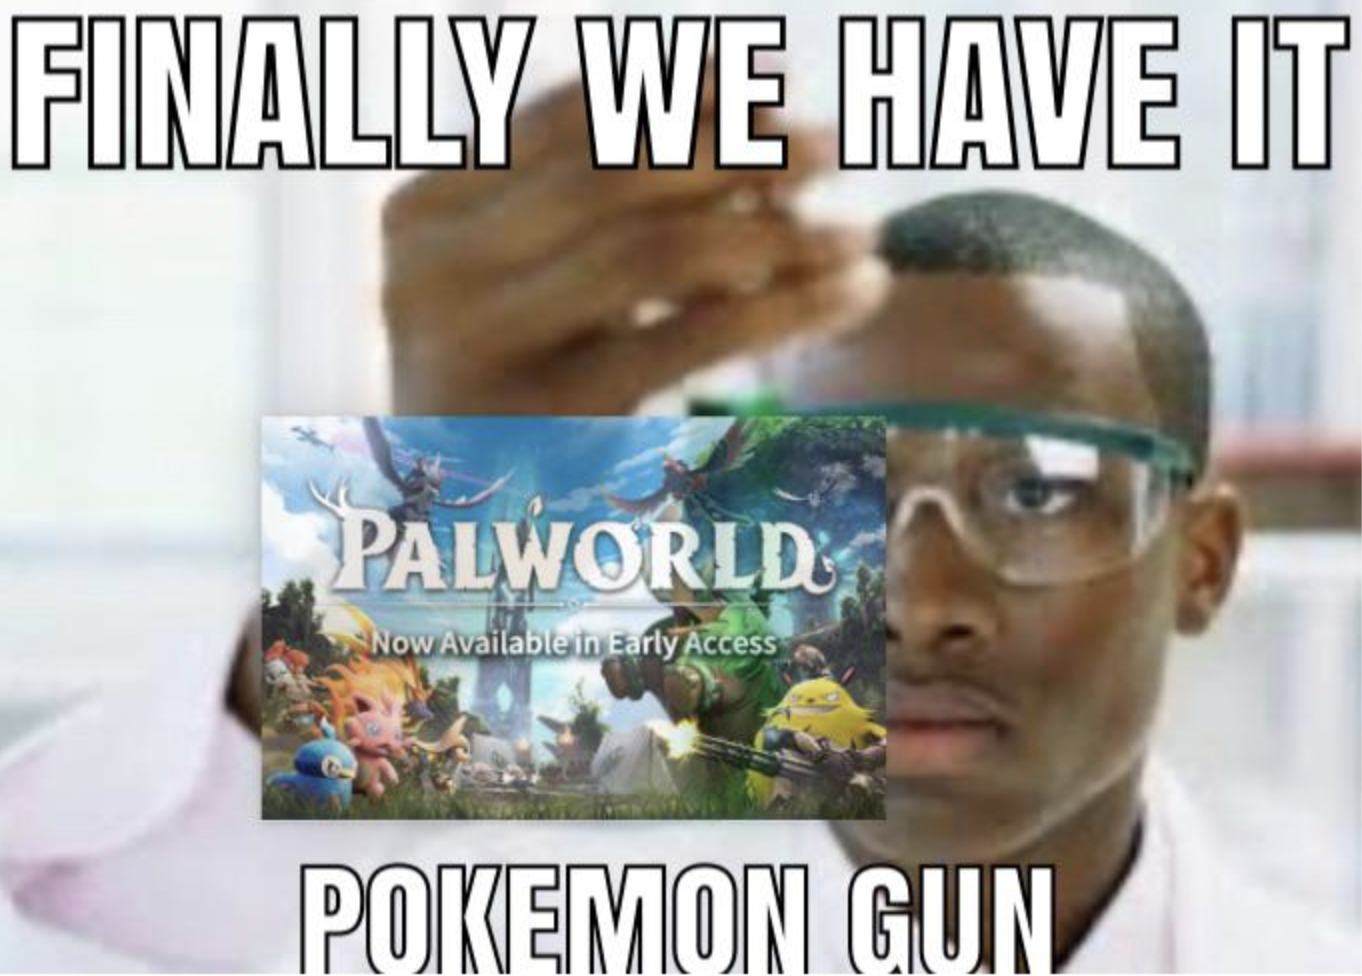 photo caption - Finally We Have It Palworld Now Available in Early Access Pokemon Gun